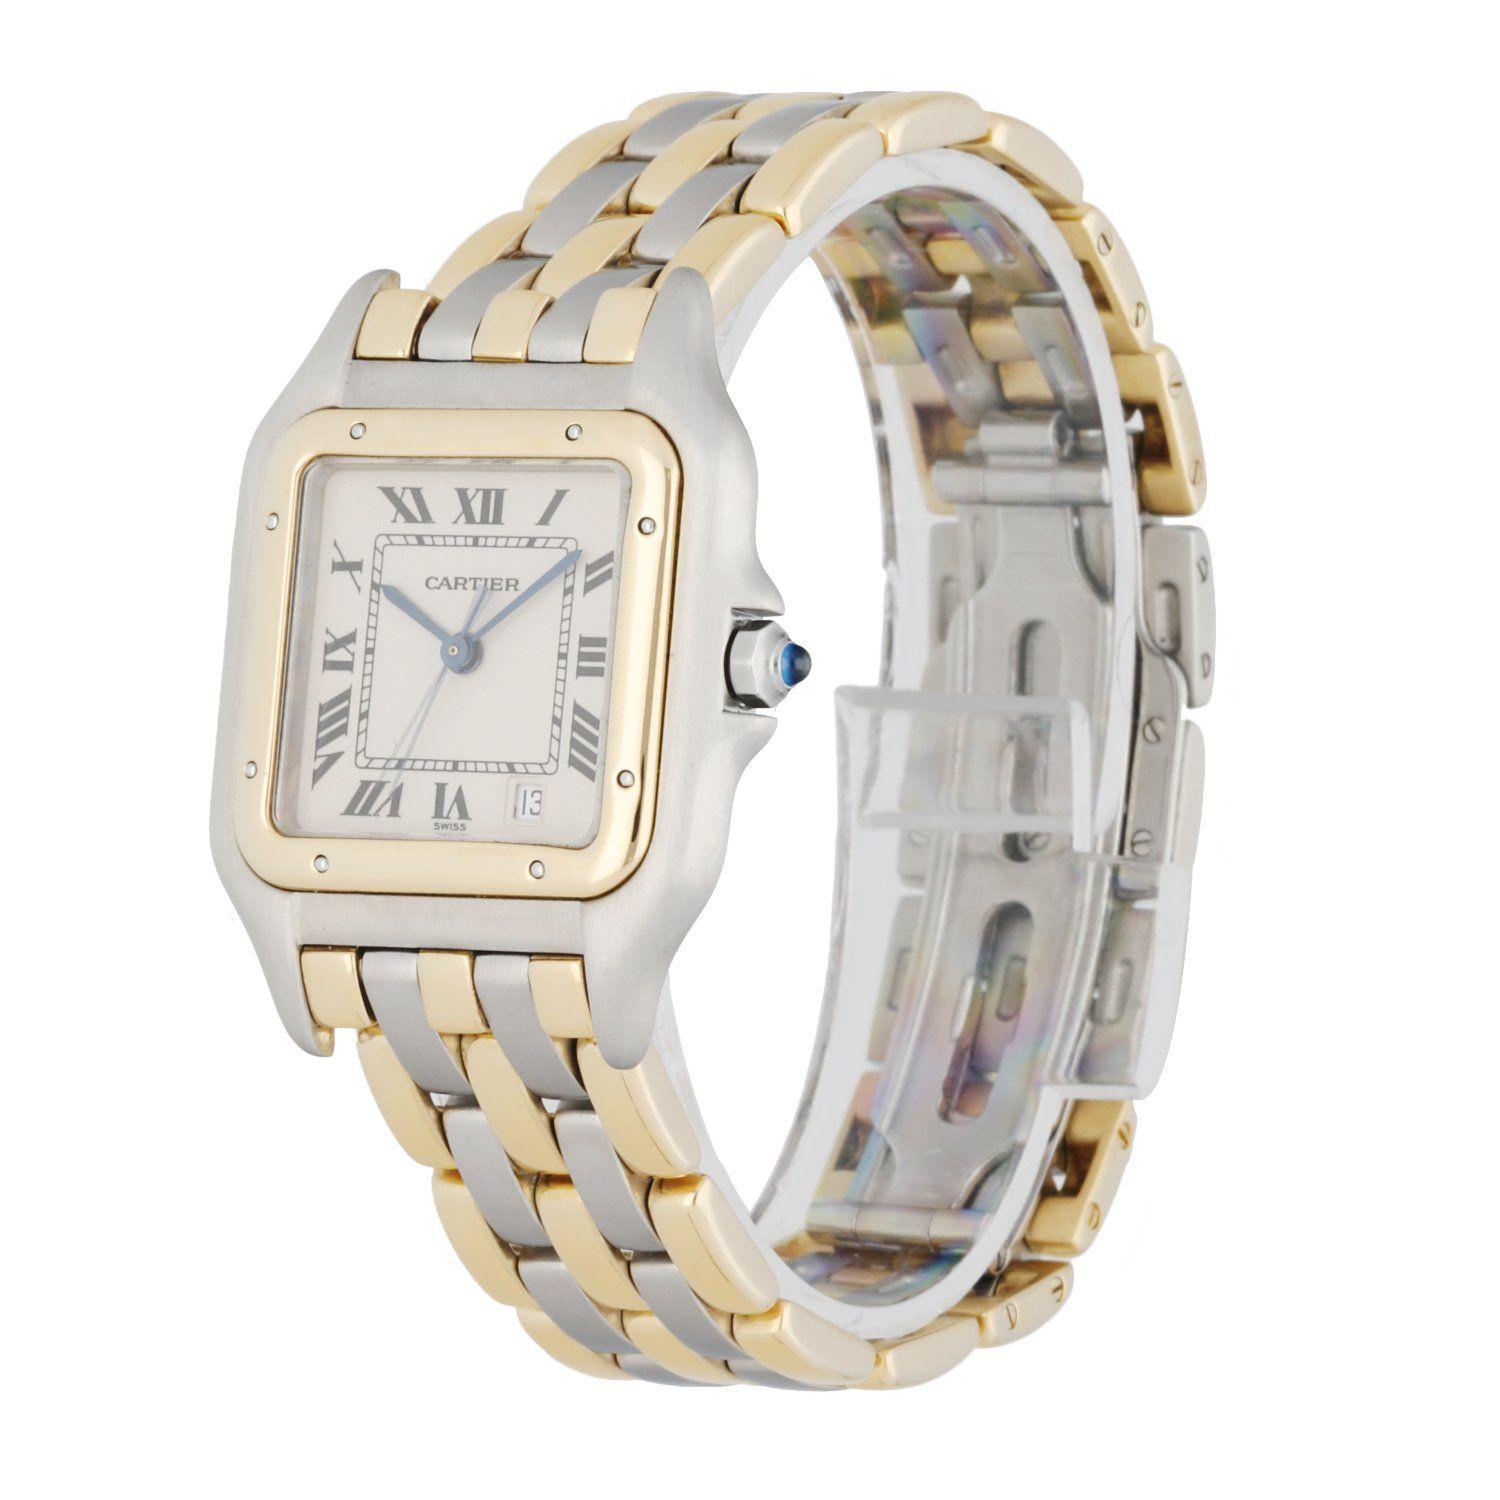 Cartier Panthere three row midsize watch. 27mm Stainless Steel case. 18K yellow gold smooth bezel. Off-White dial with blue steel hands and blackÂ Roman numeral hour markers. Minute markers on the inner dial. Date display at the 5 o'clock position.